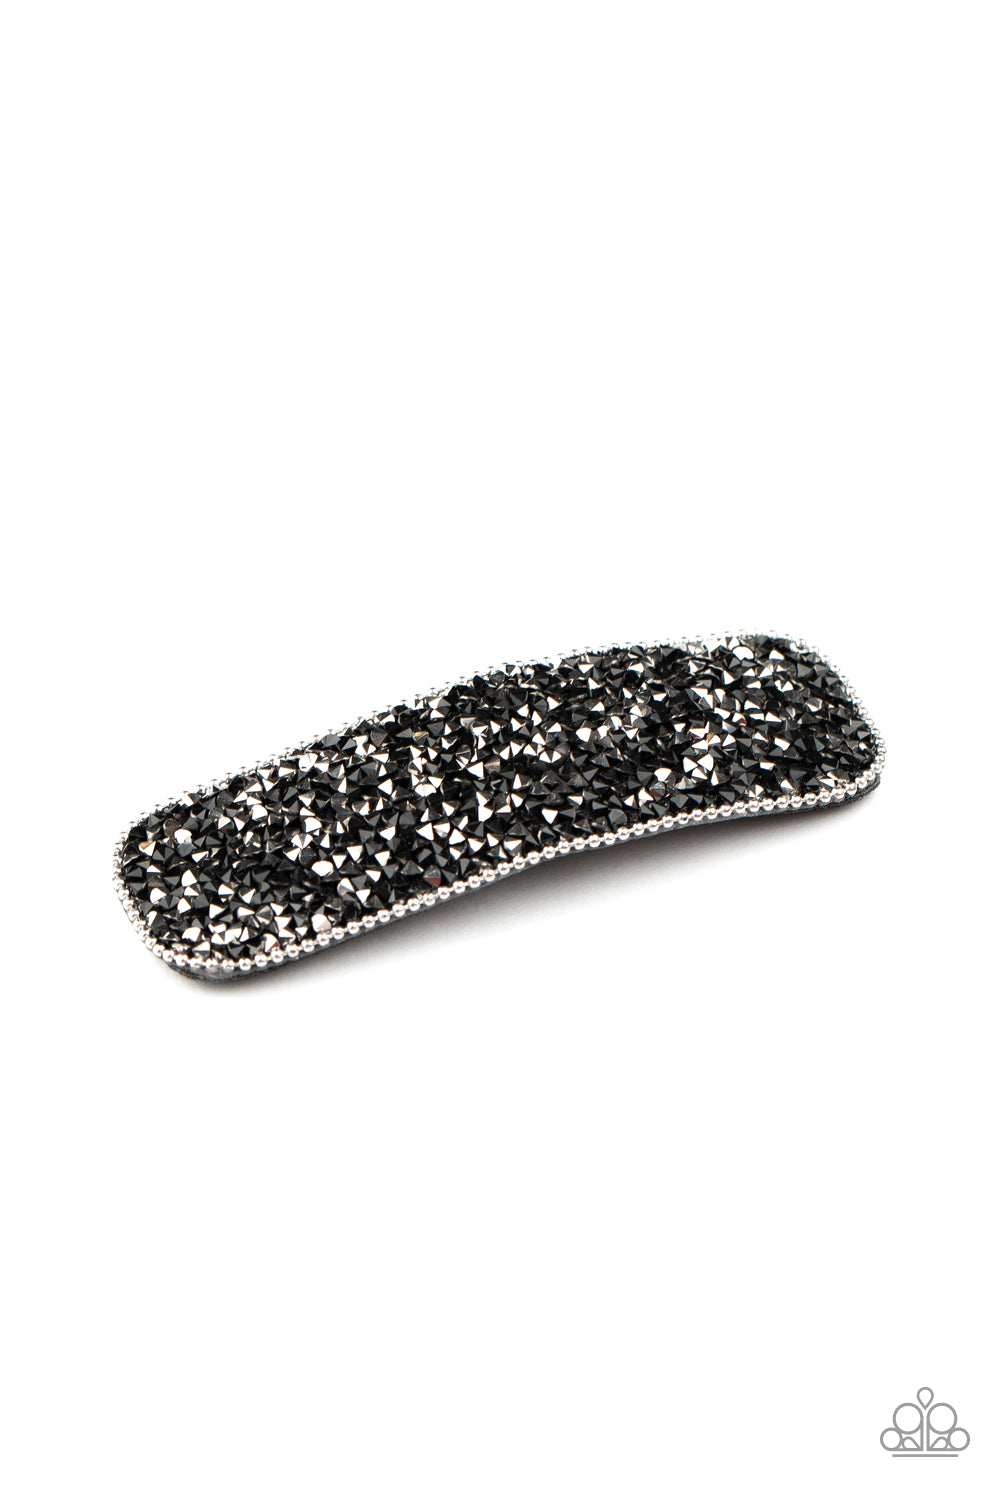 From HAIR On Out - black - Paparazzi hair clip